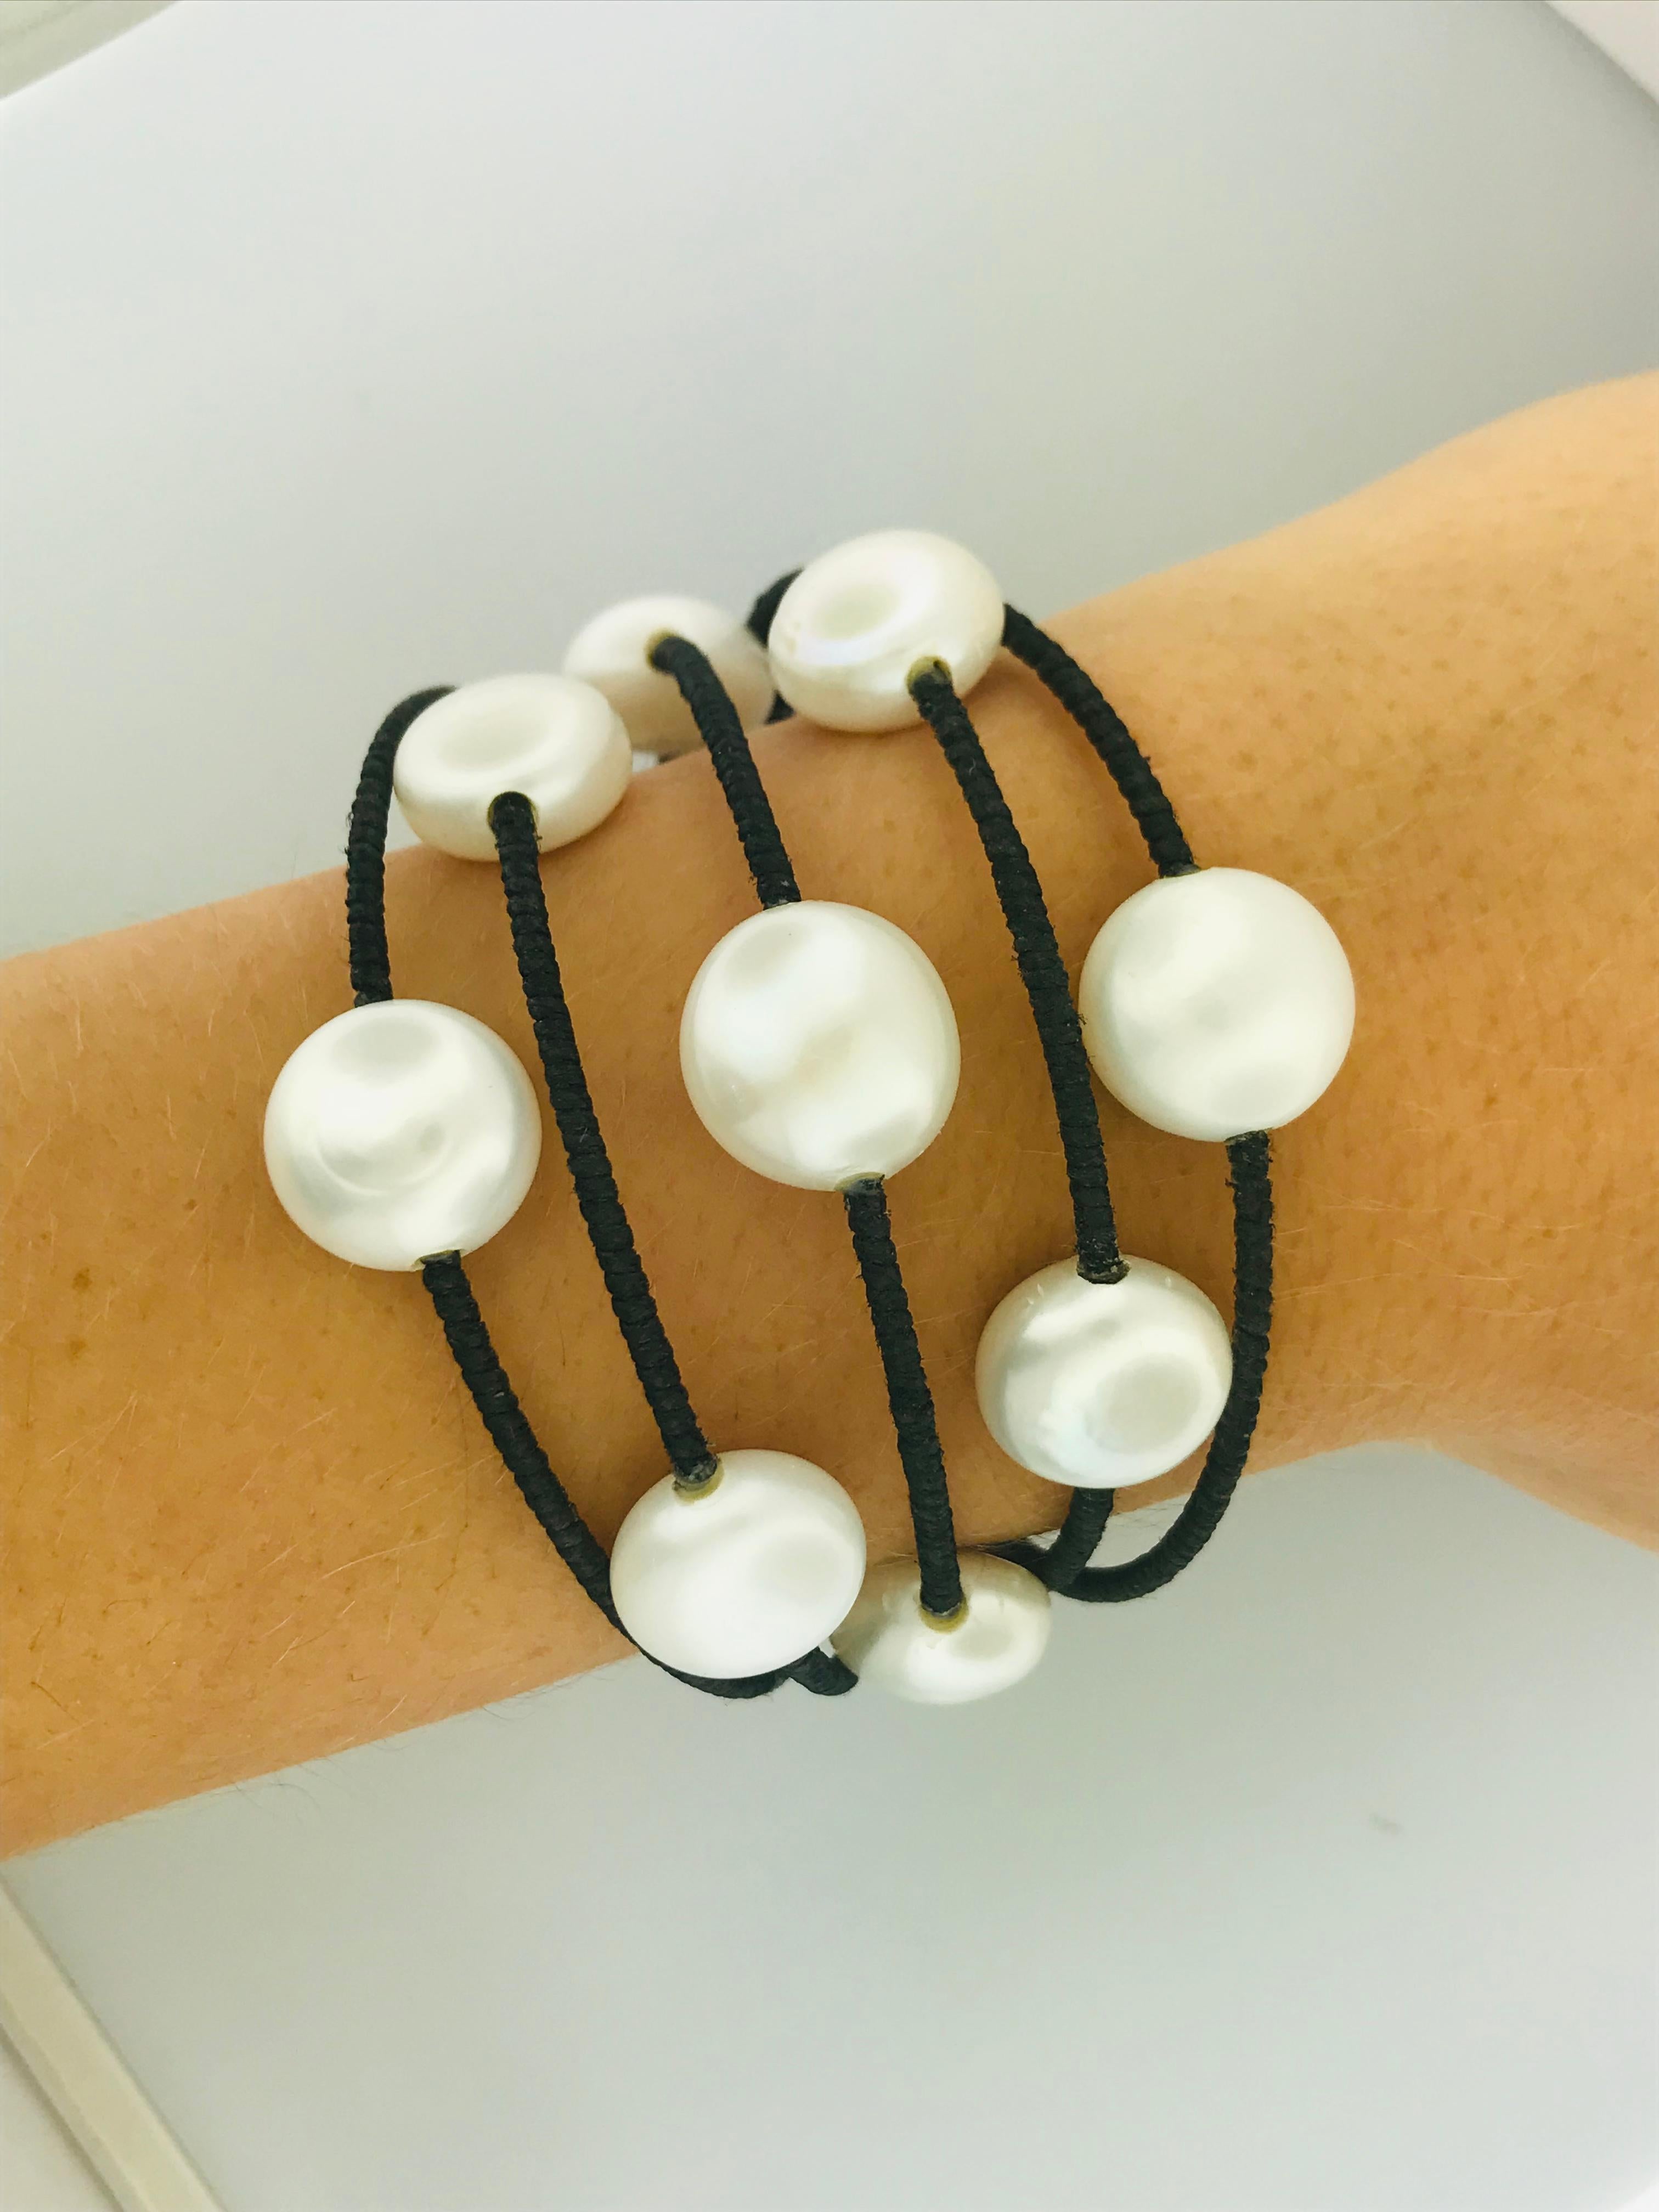 How cute is this modern design with classic materials? Genuine, cultured pearls have been worn forever, the embody class and sophistication. But pearls should be worn for fun too! This fun modern layered pearl station bracelet is a new, one of a